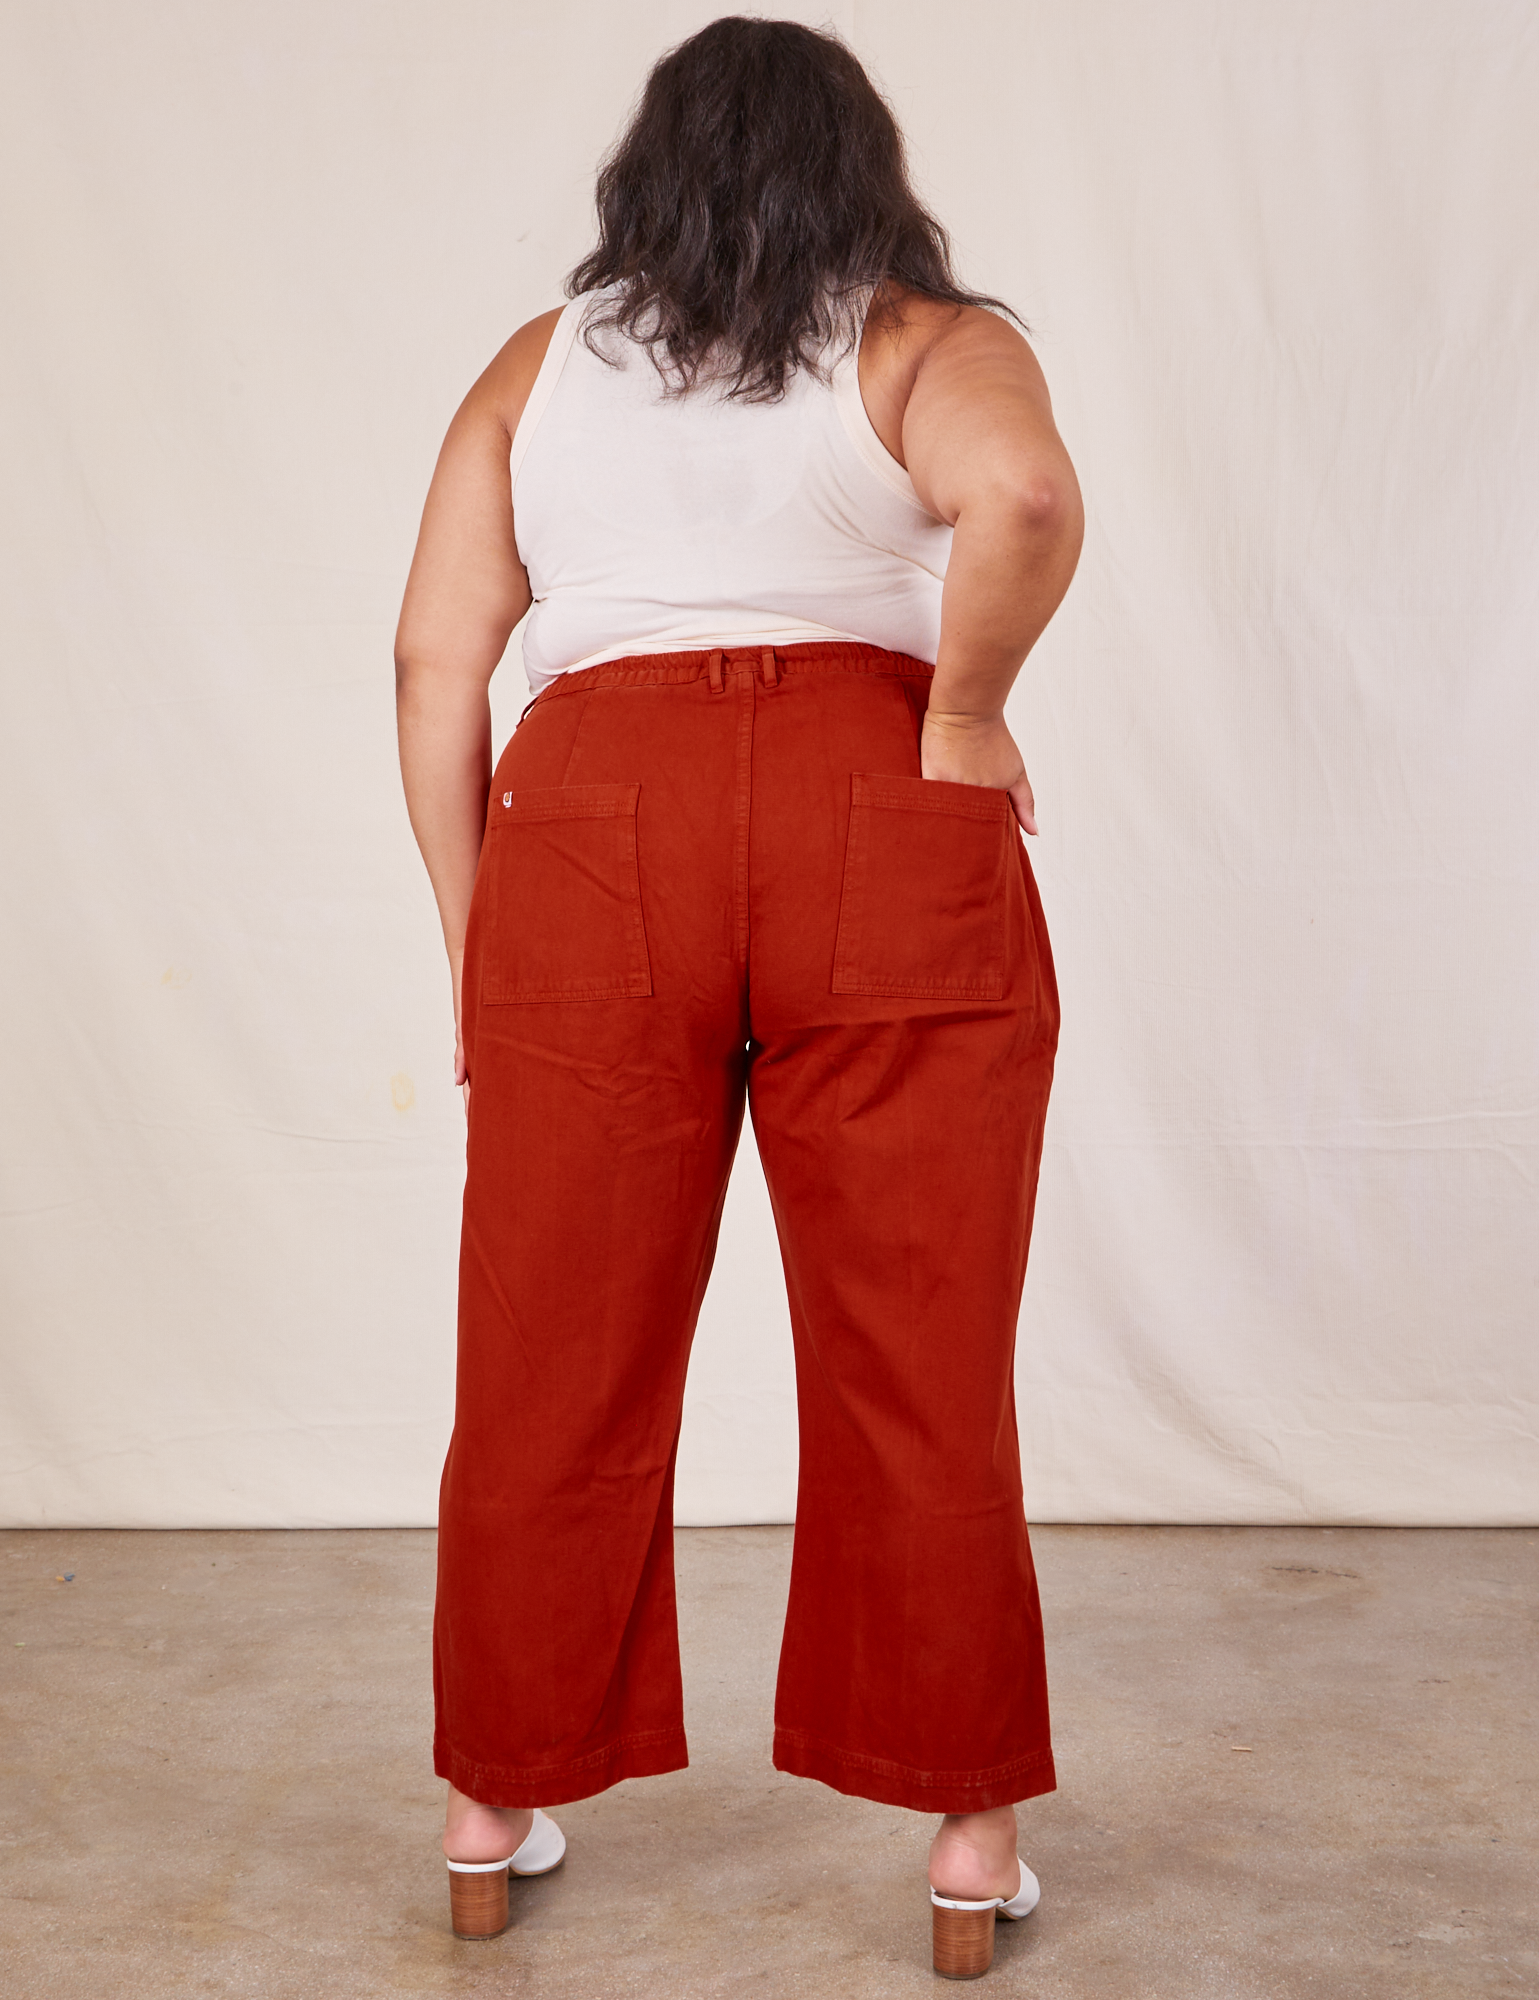 Back view of Western Pants in Paprika and Tank Top in vintage tee off-white worn by Alicia. She also has one hand in the pocket.